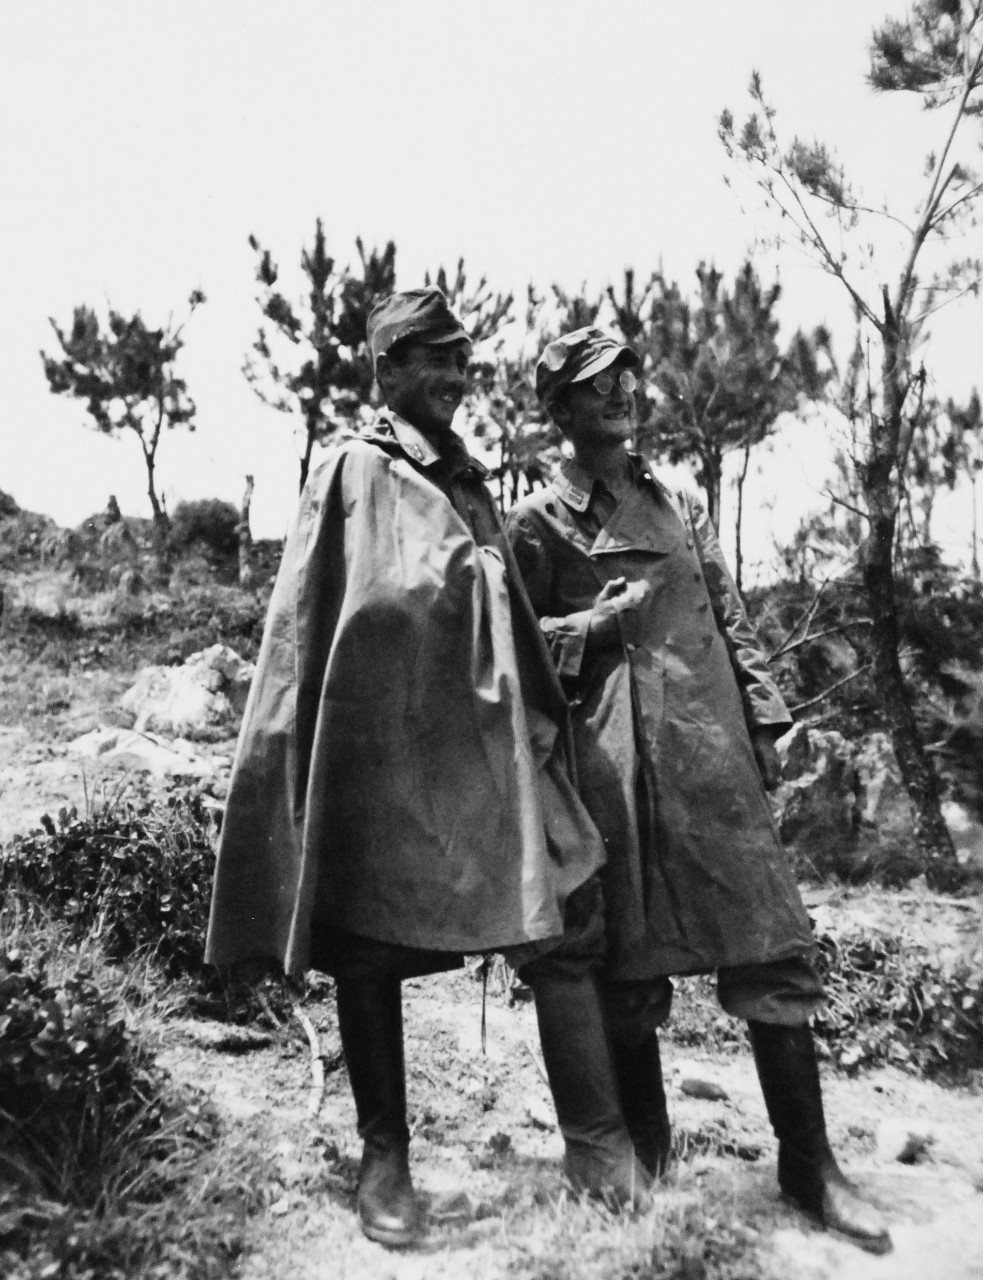 127-GW-535-119542:   Okinawa Campaign, April-June 1945.    Shown (left to right):  Sergeant F.E. Lewellyn and Private First Class A.F. Van Sickle, wearing Japanese uniforms found on Okinawa.   Photographed by Private First Class Chamberlain, April 1945.  Official U.S. Navy Photograph, now in the collections of the National Archives.   (2014/6/25). 